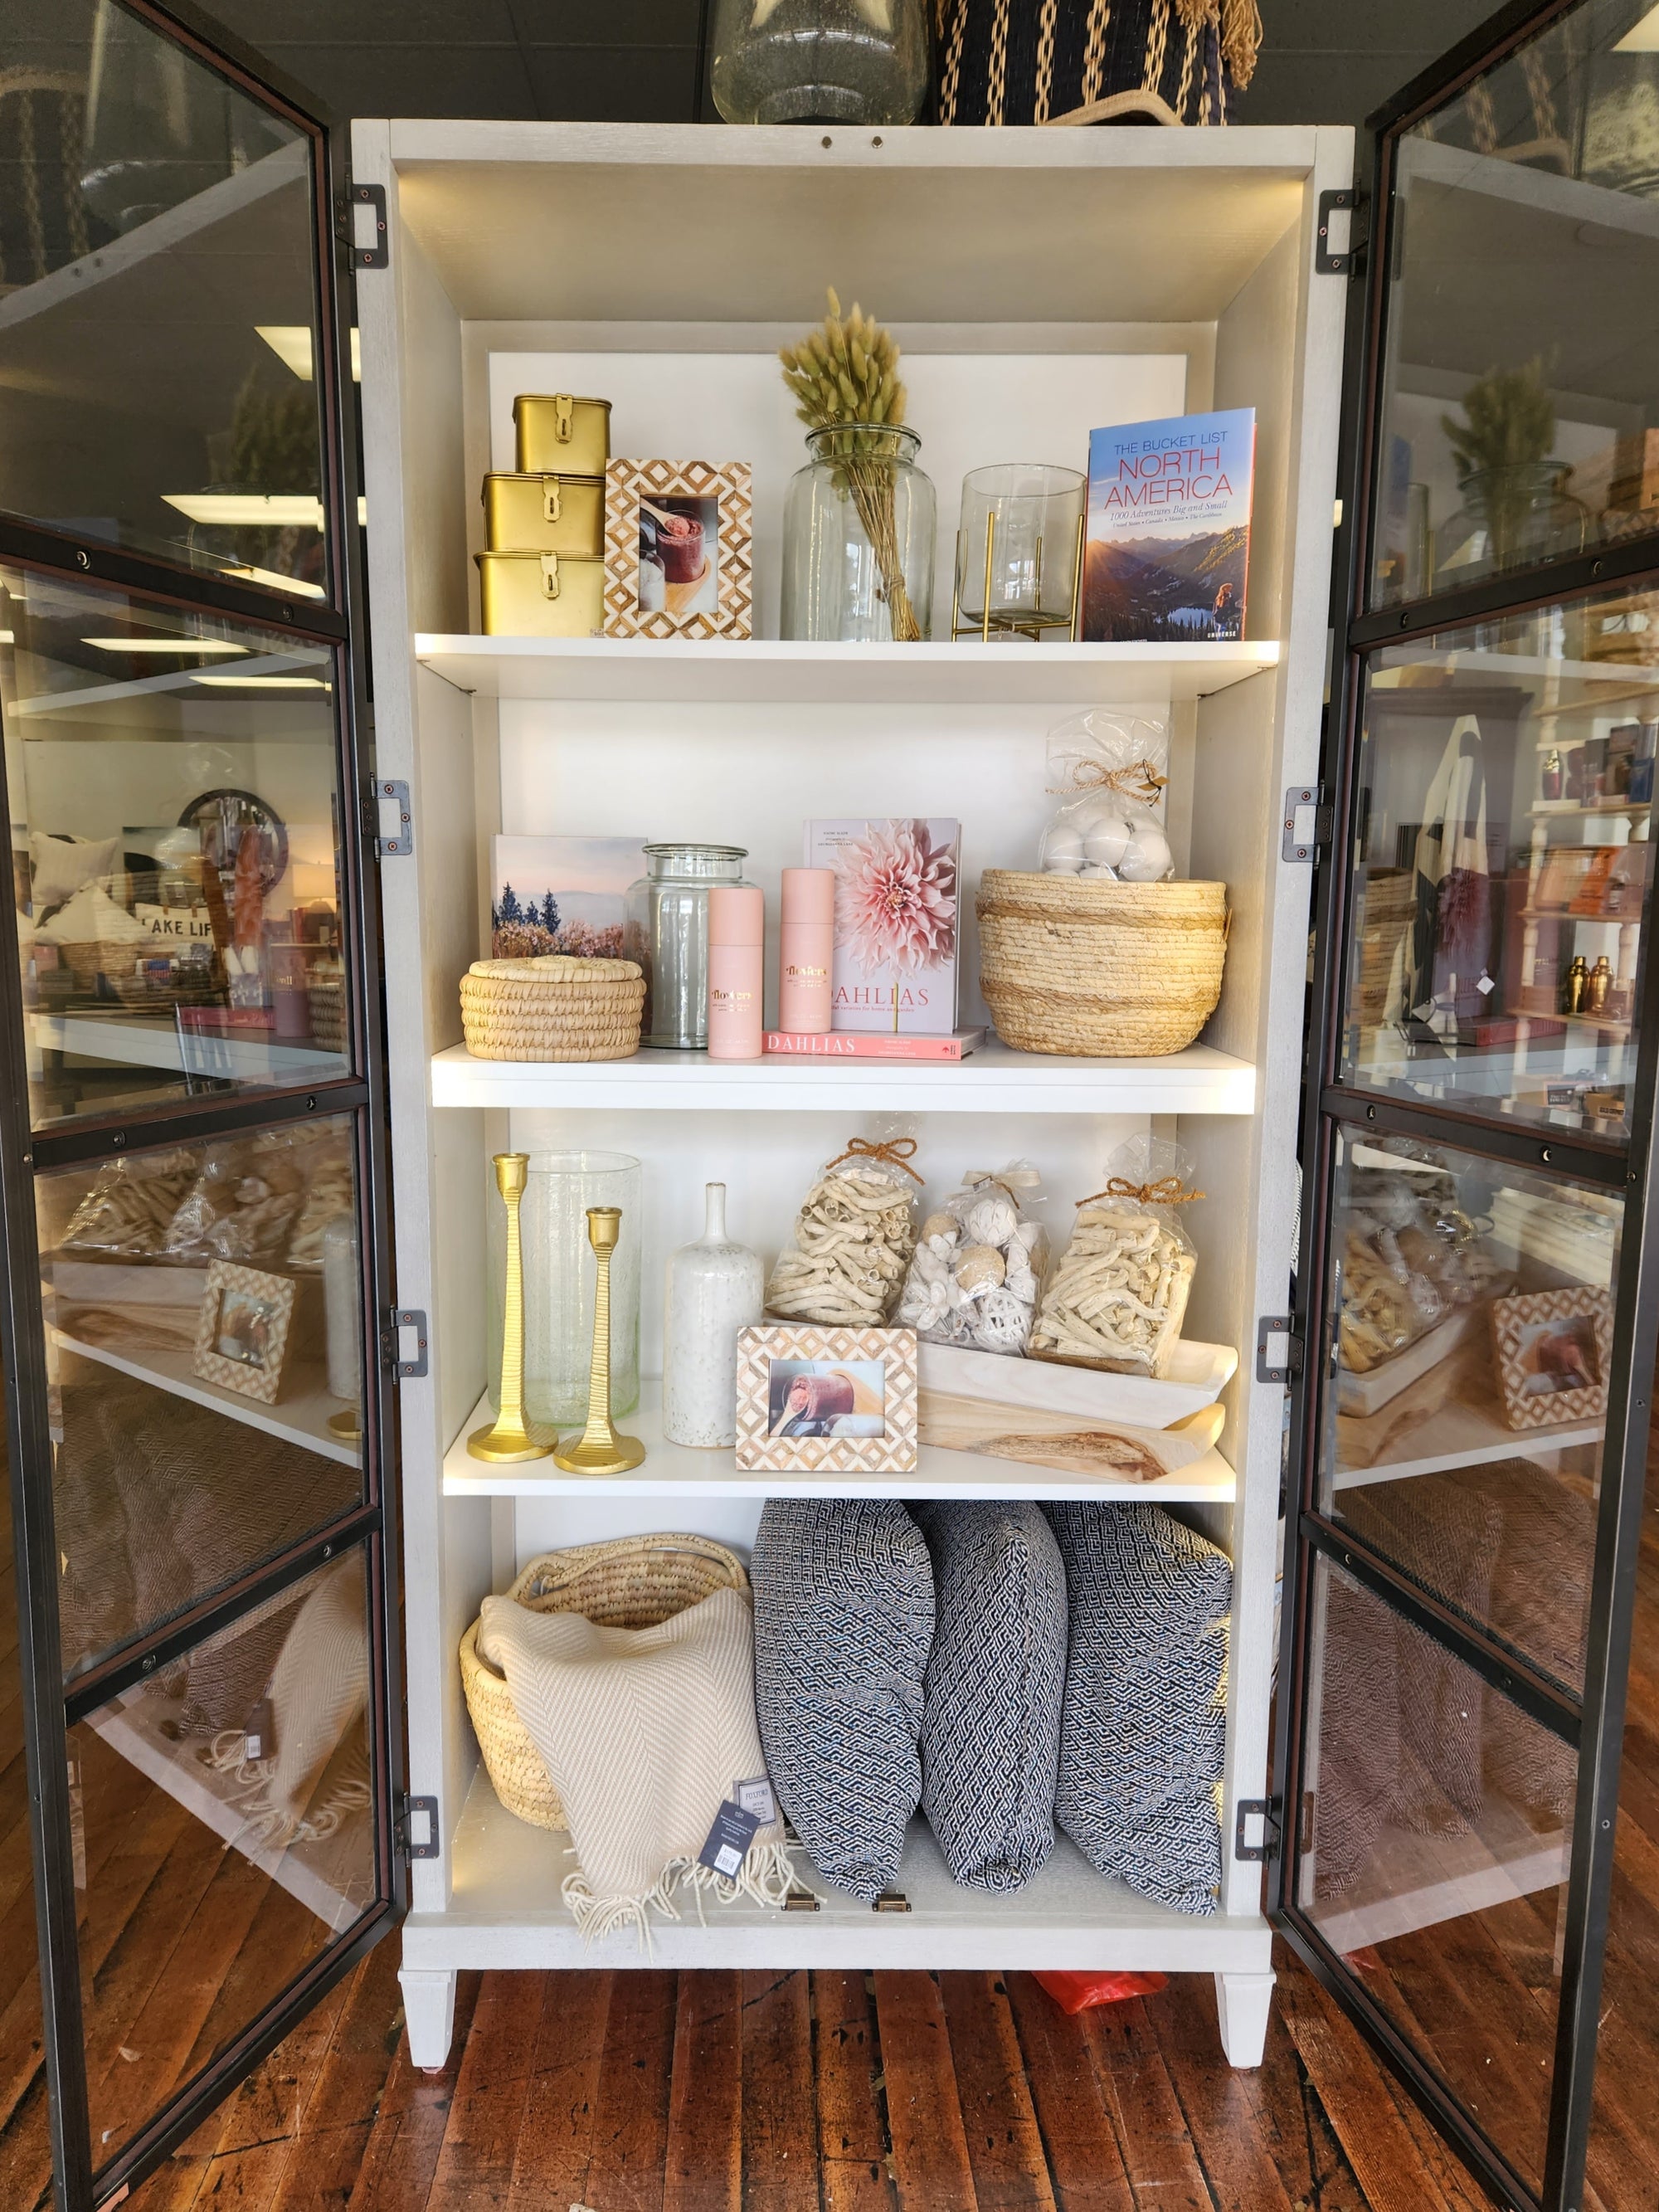 Lighted display case with gold accents, pillows and blankets, and natural baskets